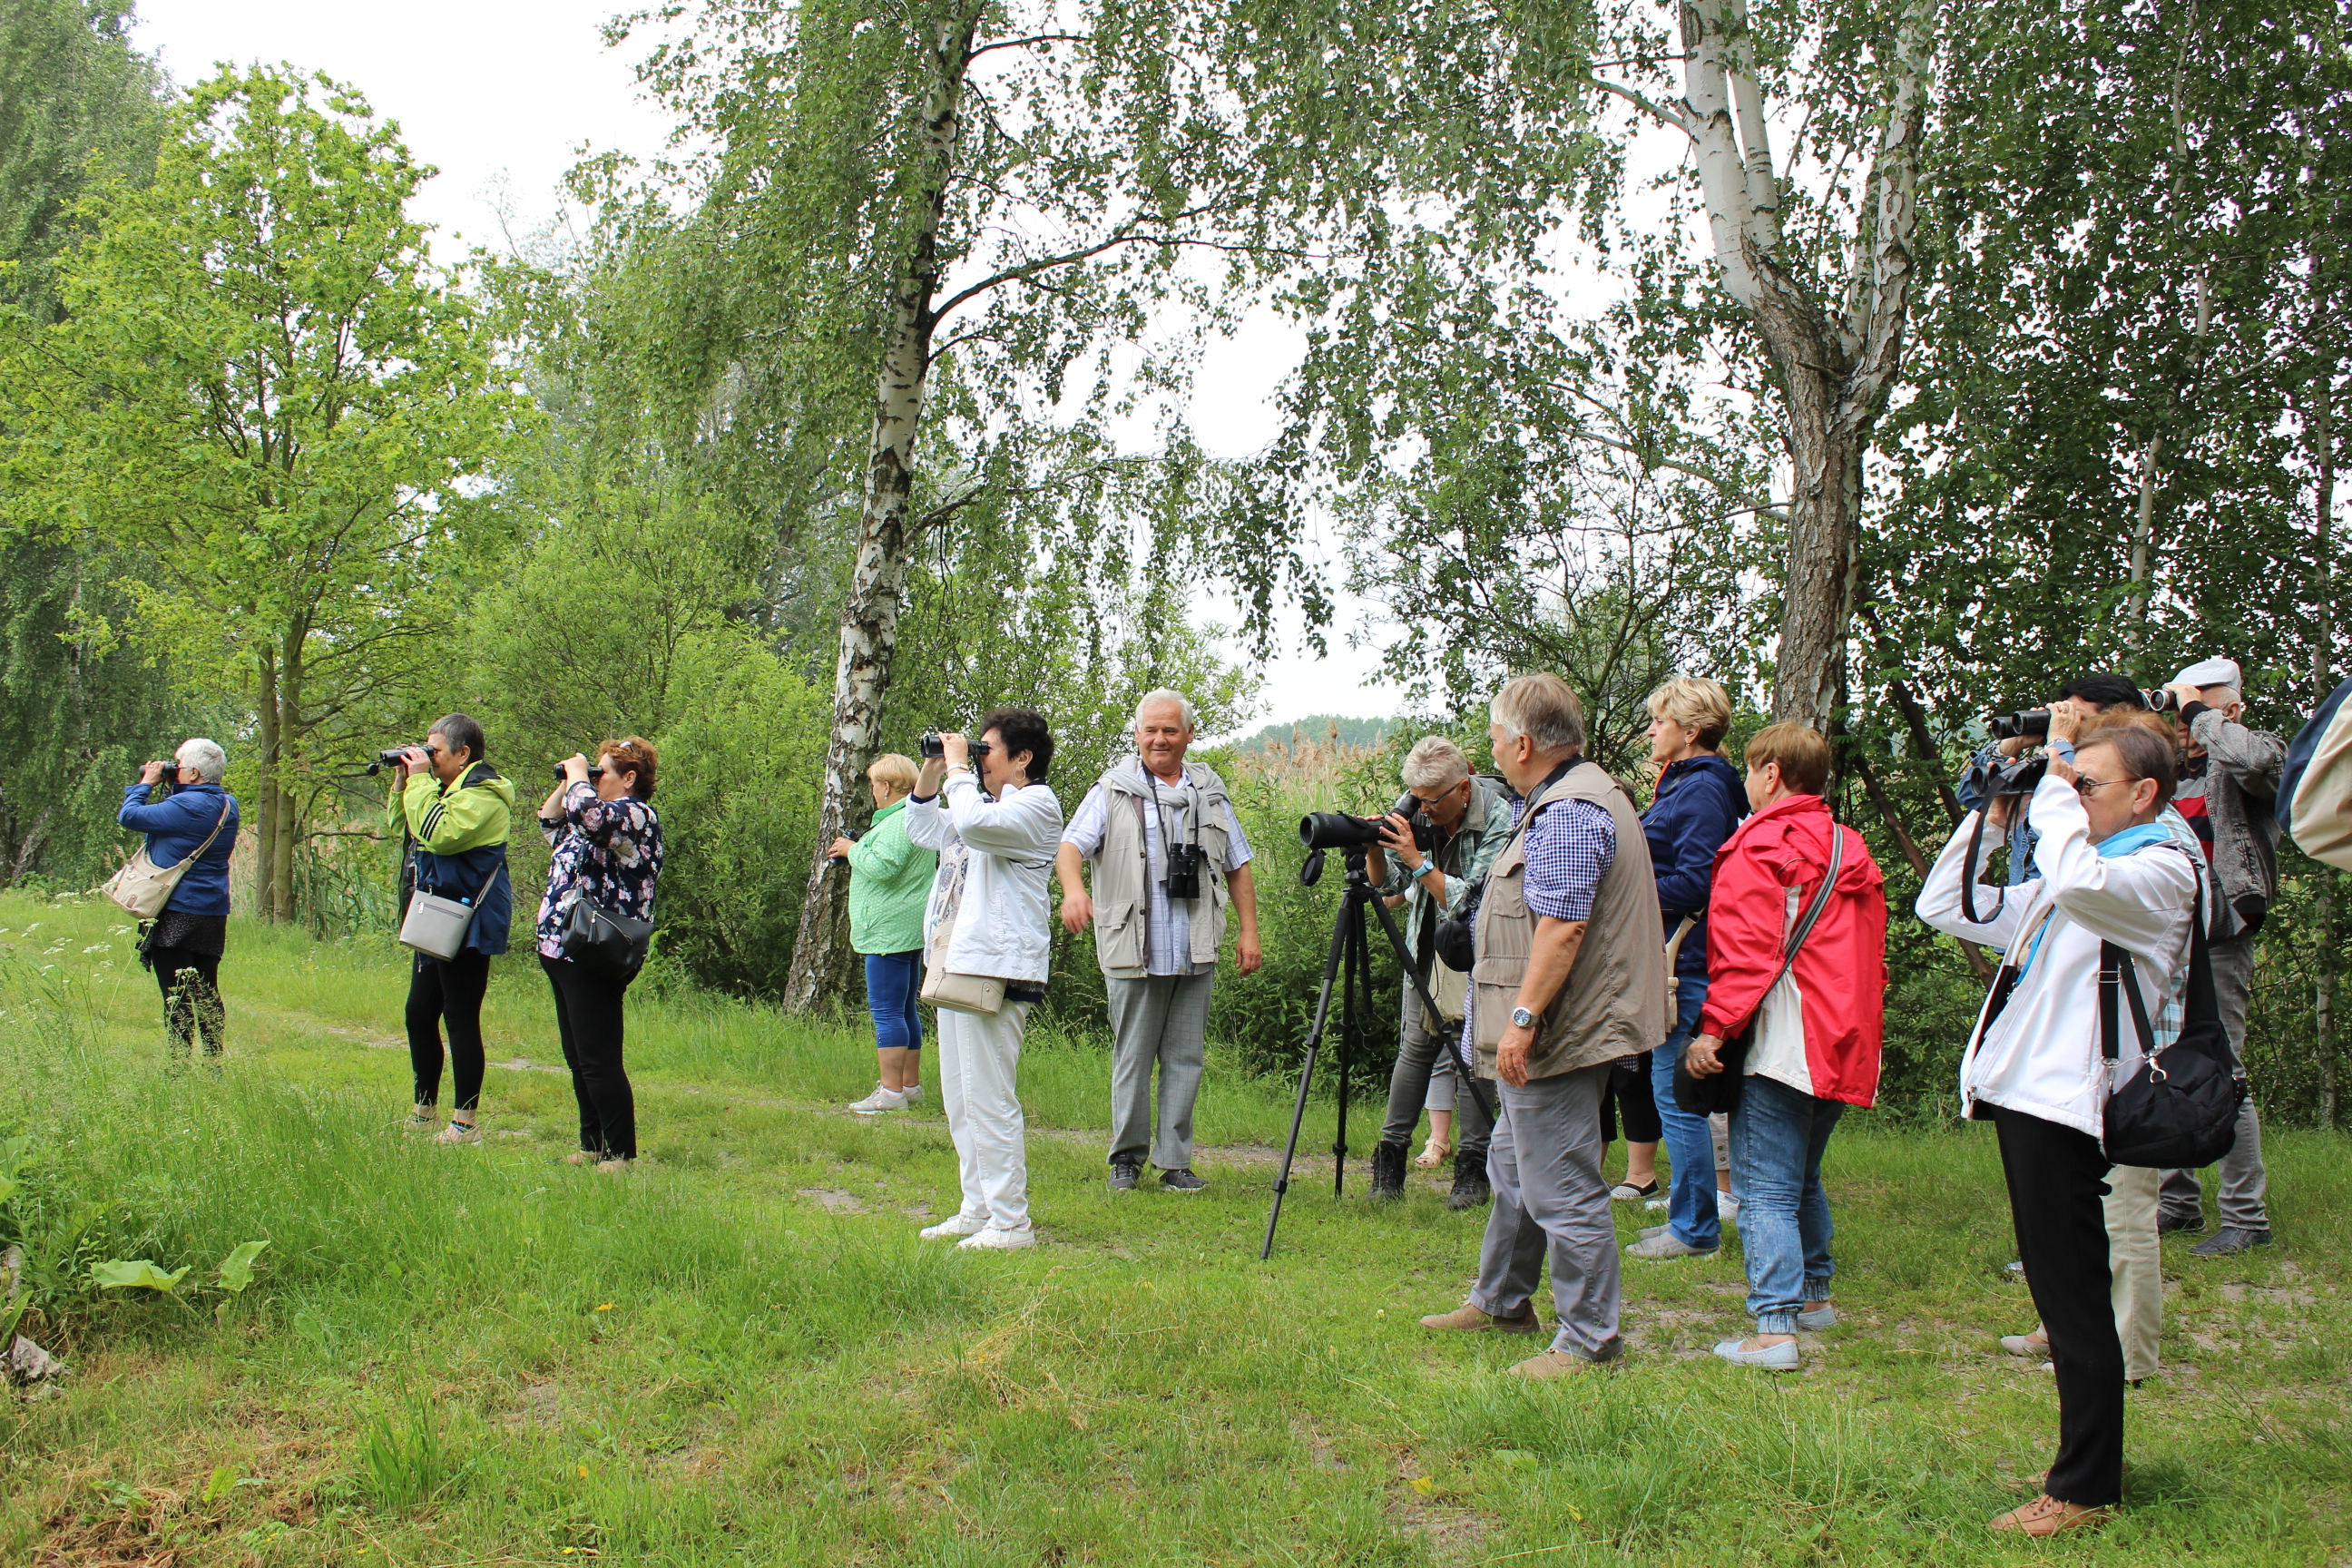 Birdwatching in the ‘Milice Ponds’ Nature Reserve – classes 'Birds, an Essential Component of Our Lives. What Can be Done to Ensure That Human Activity Does Not Harm Them?’ with Beata Orłowska, MA (in the picture).